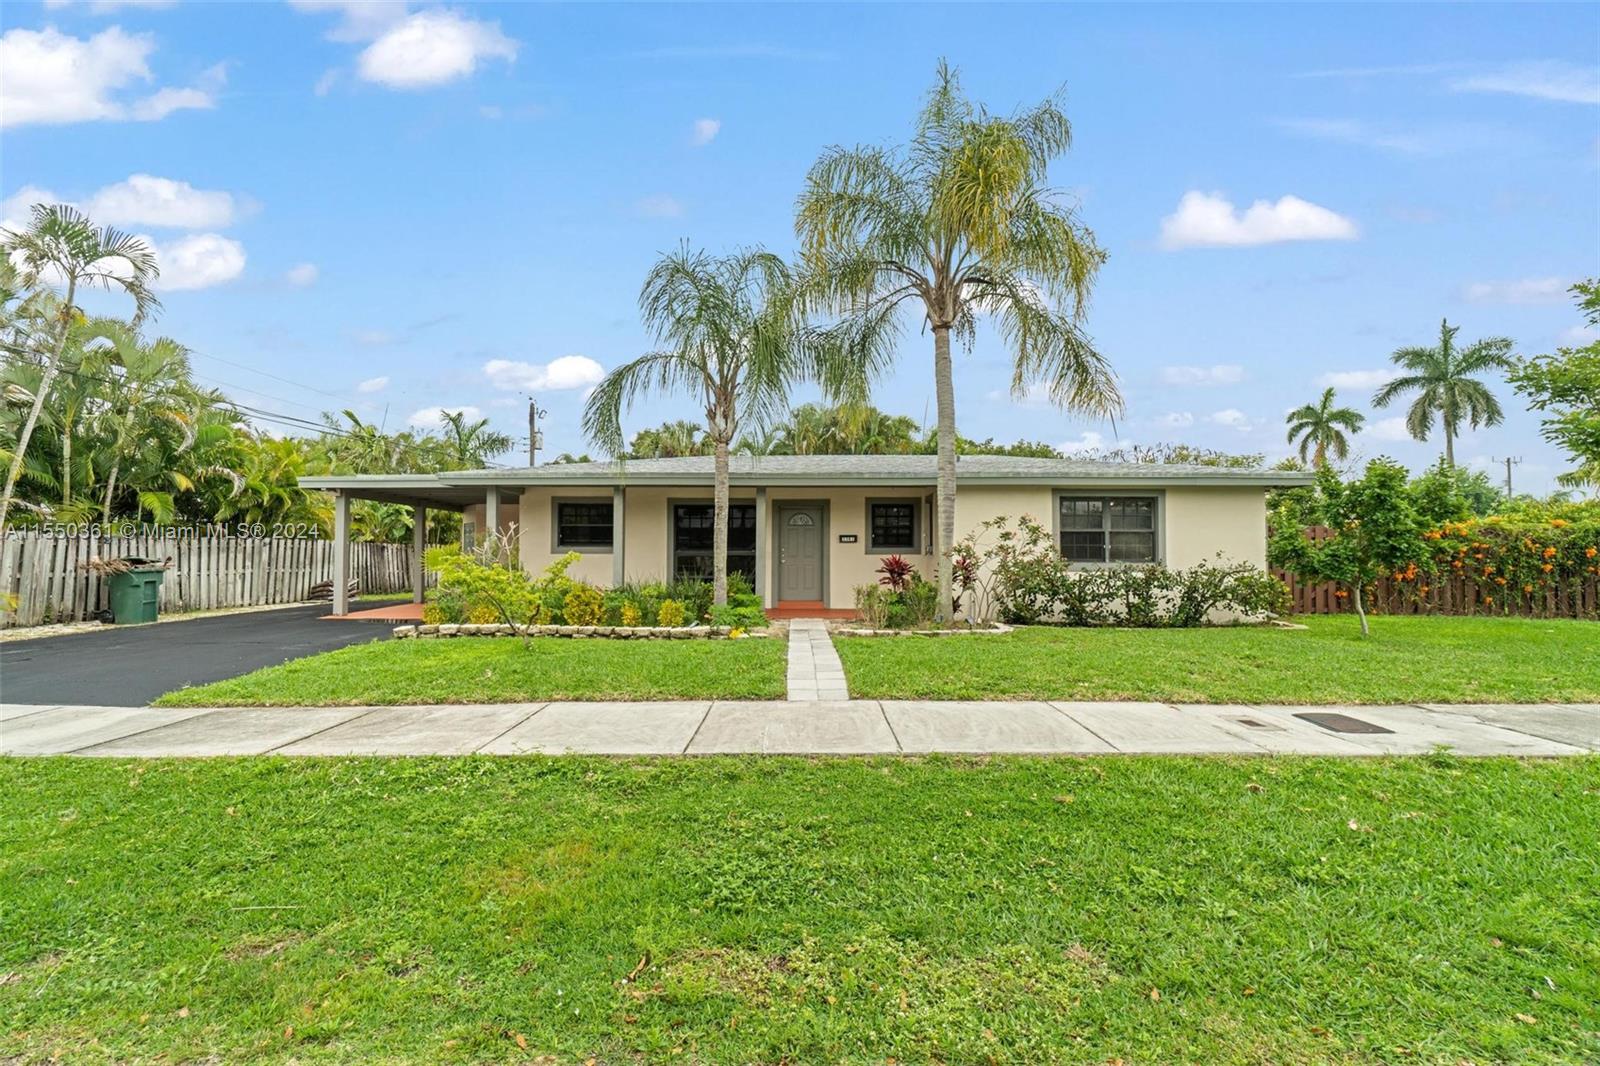 3381 Sw 18th St, Fort Lauderdale, Broward County, Florida - 4 Bedrooms  
2 Bathrooms - 